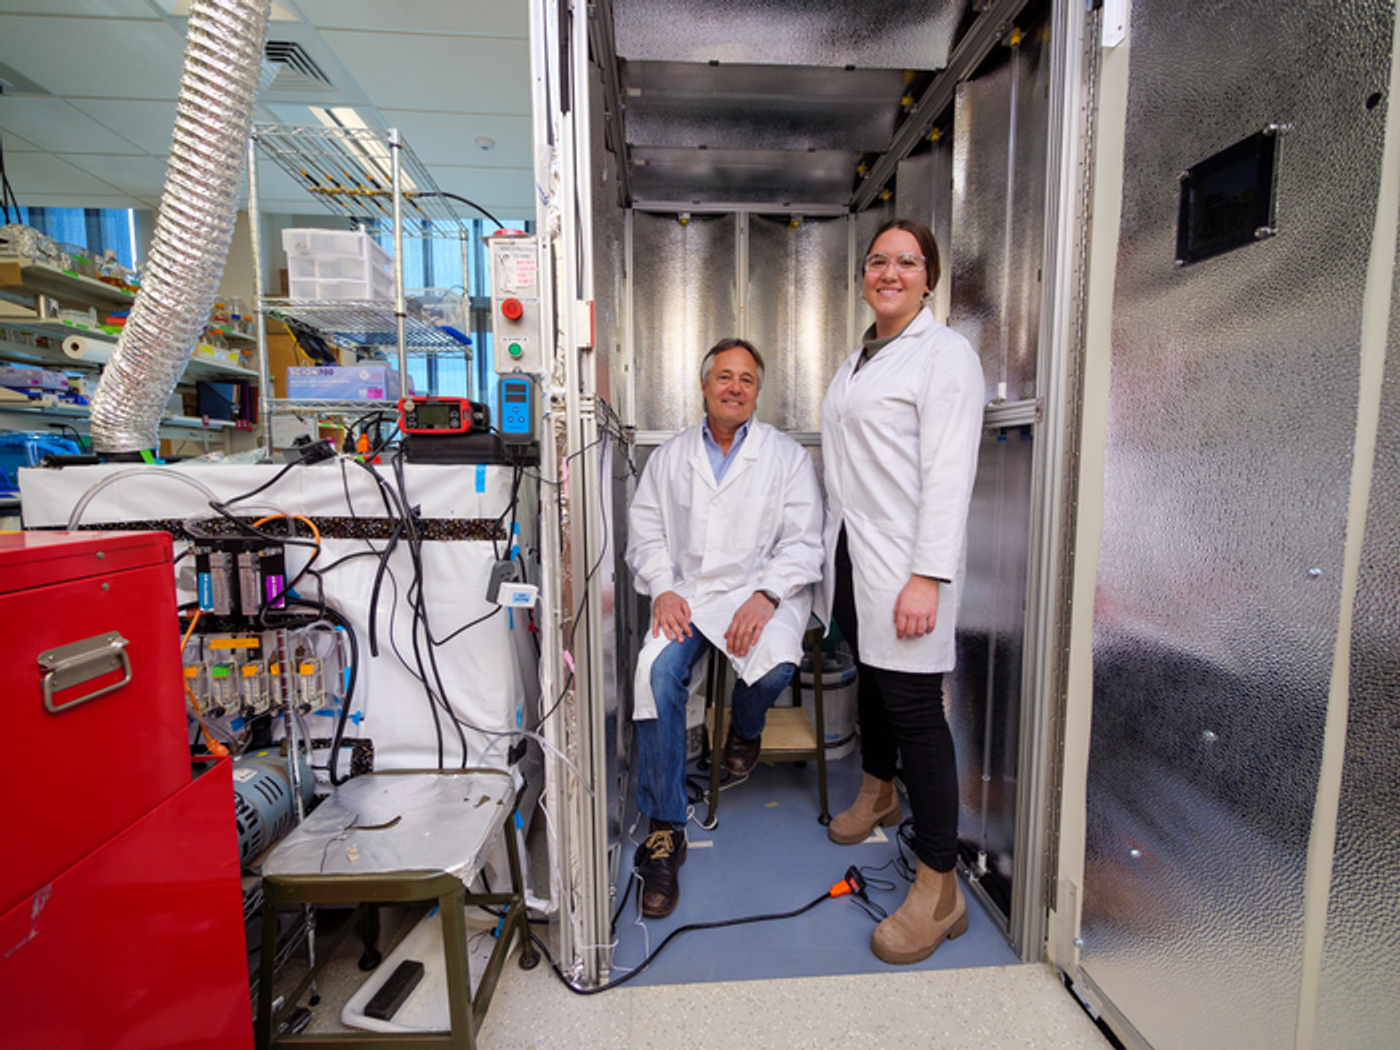 Dr. Mark Hernandez, S. J. Archuleta Professor of Civil and Environmental Engineering, and CU PhD graduate Marina Nieto-Caballero, now a postdoctoral researcher at Colorado State University, standing inside a bioaerosol chamber in the Environmental Engineering disinfection laboratory at the Sustainability, Energy and Environment Complex (SEEC). Credit  Patrick Campbell/University of Colorado